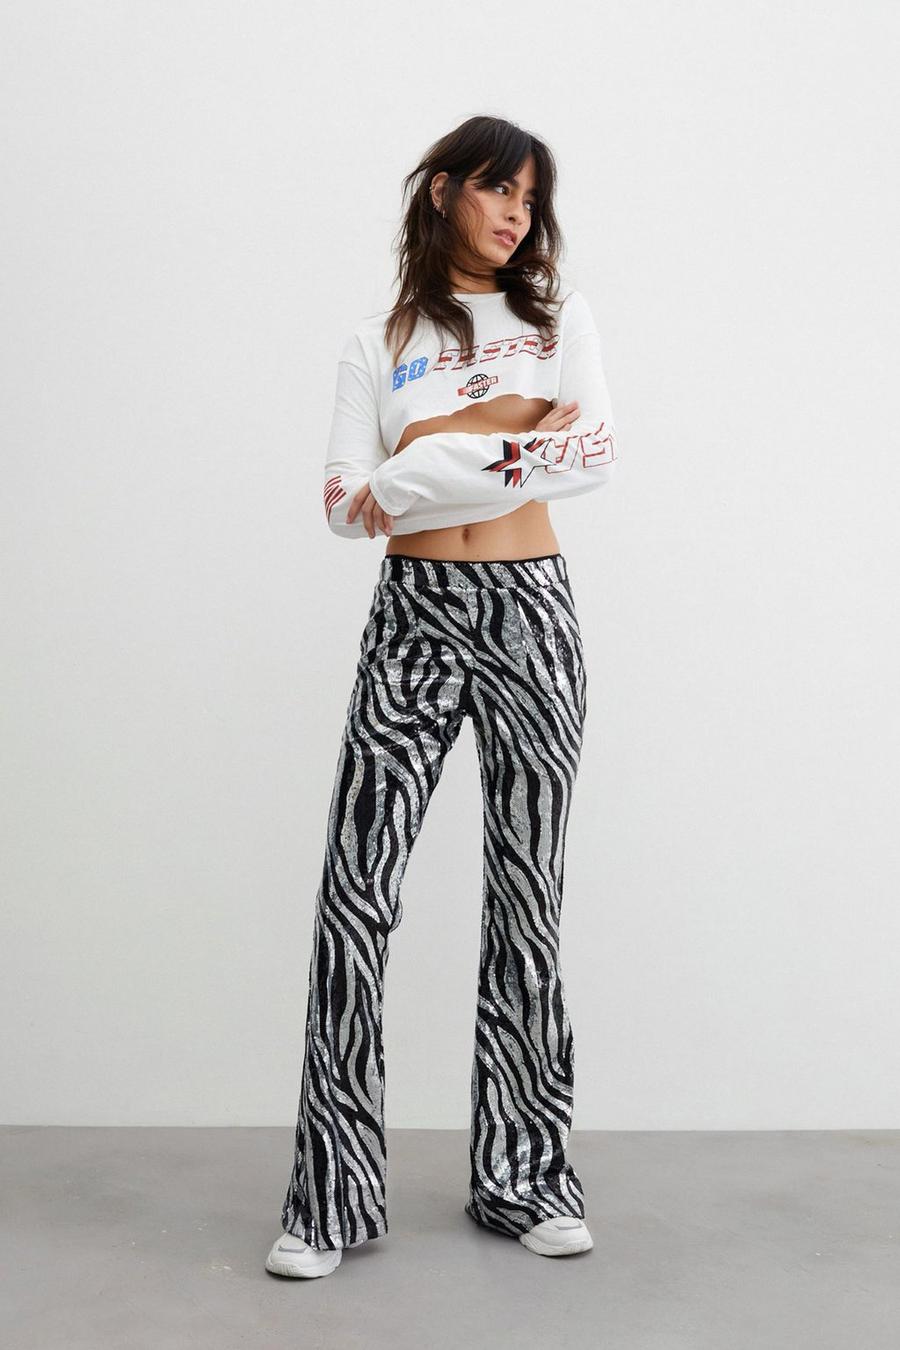 Sequin Fit and Flare Zebra Print Trousers